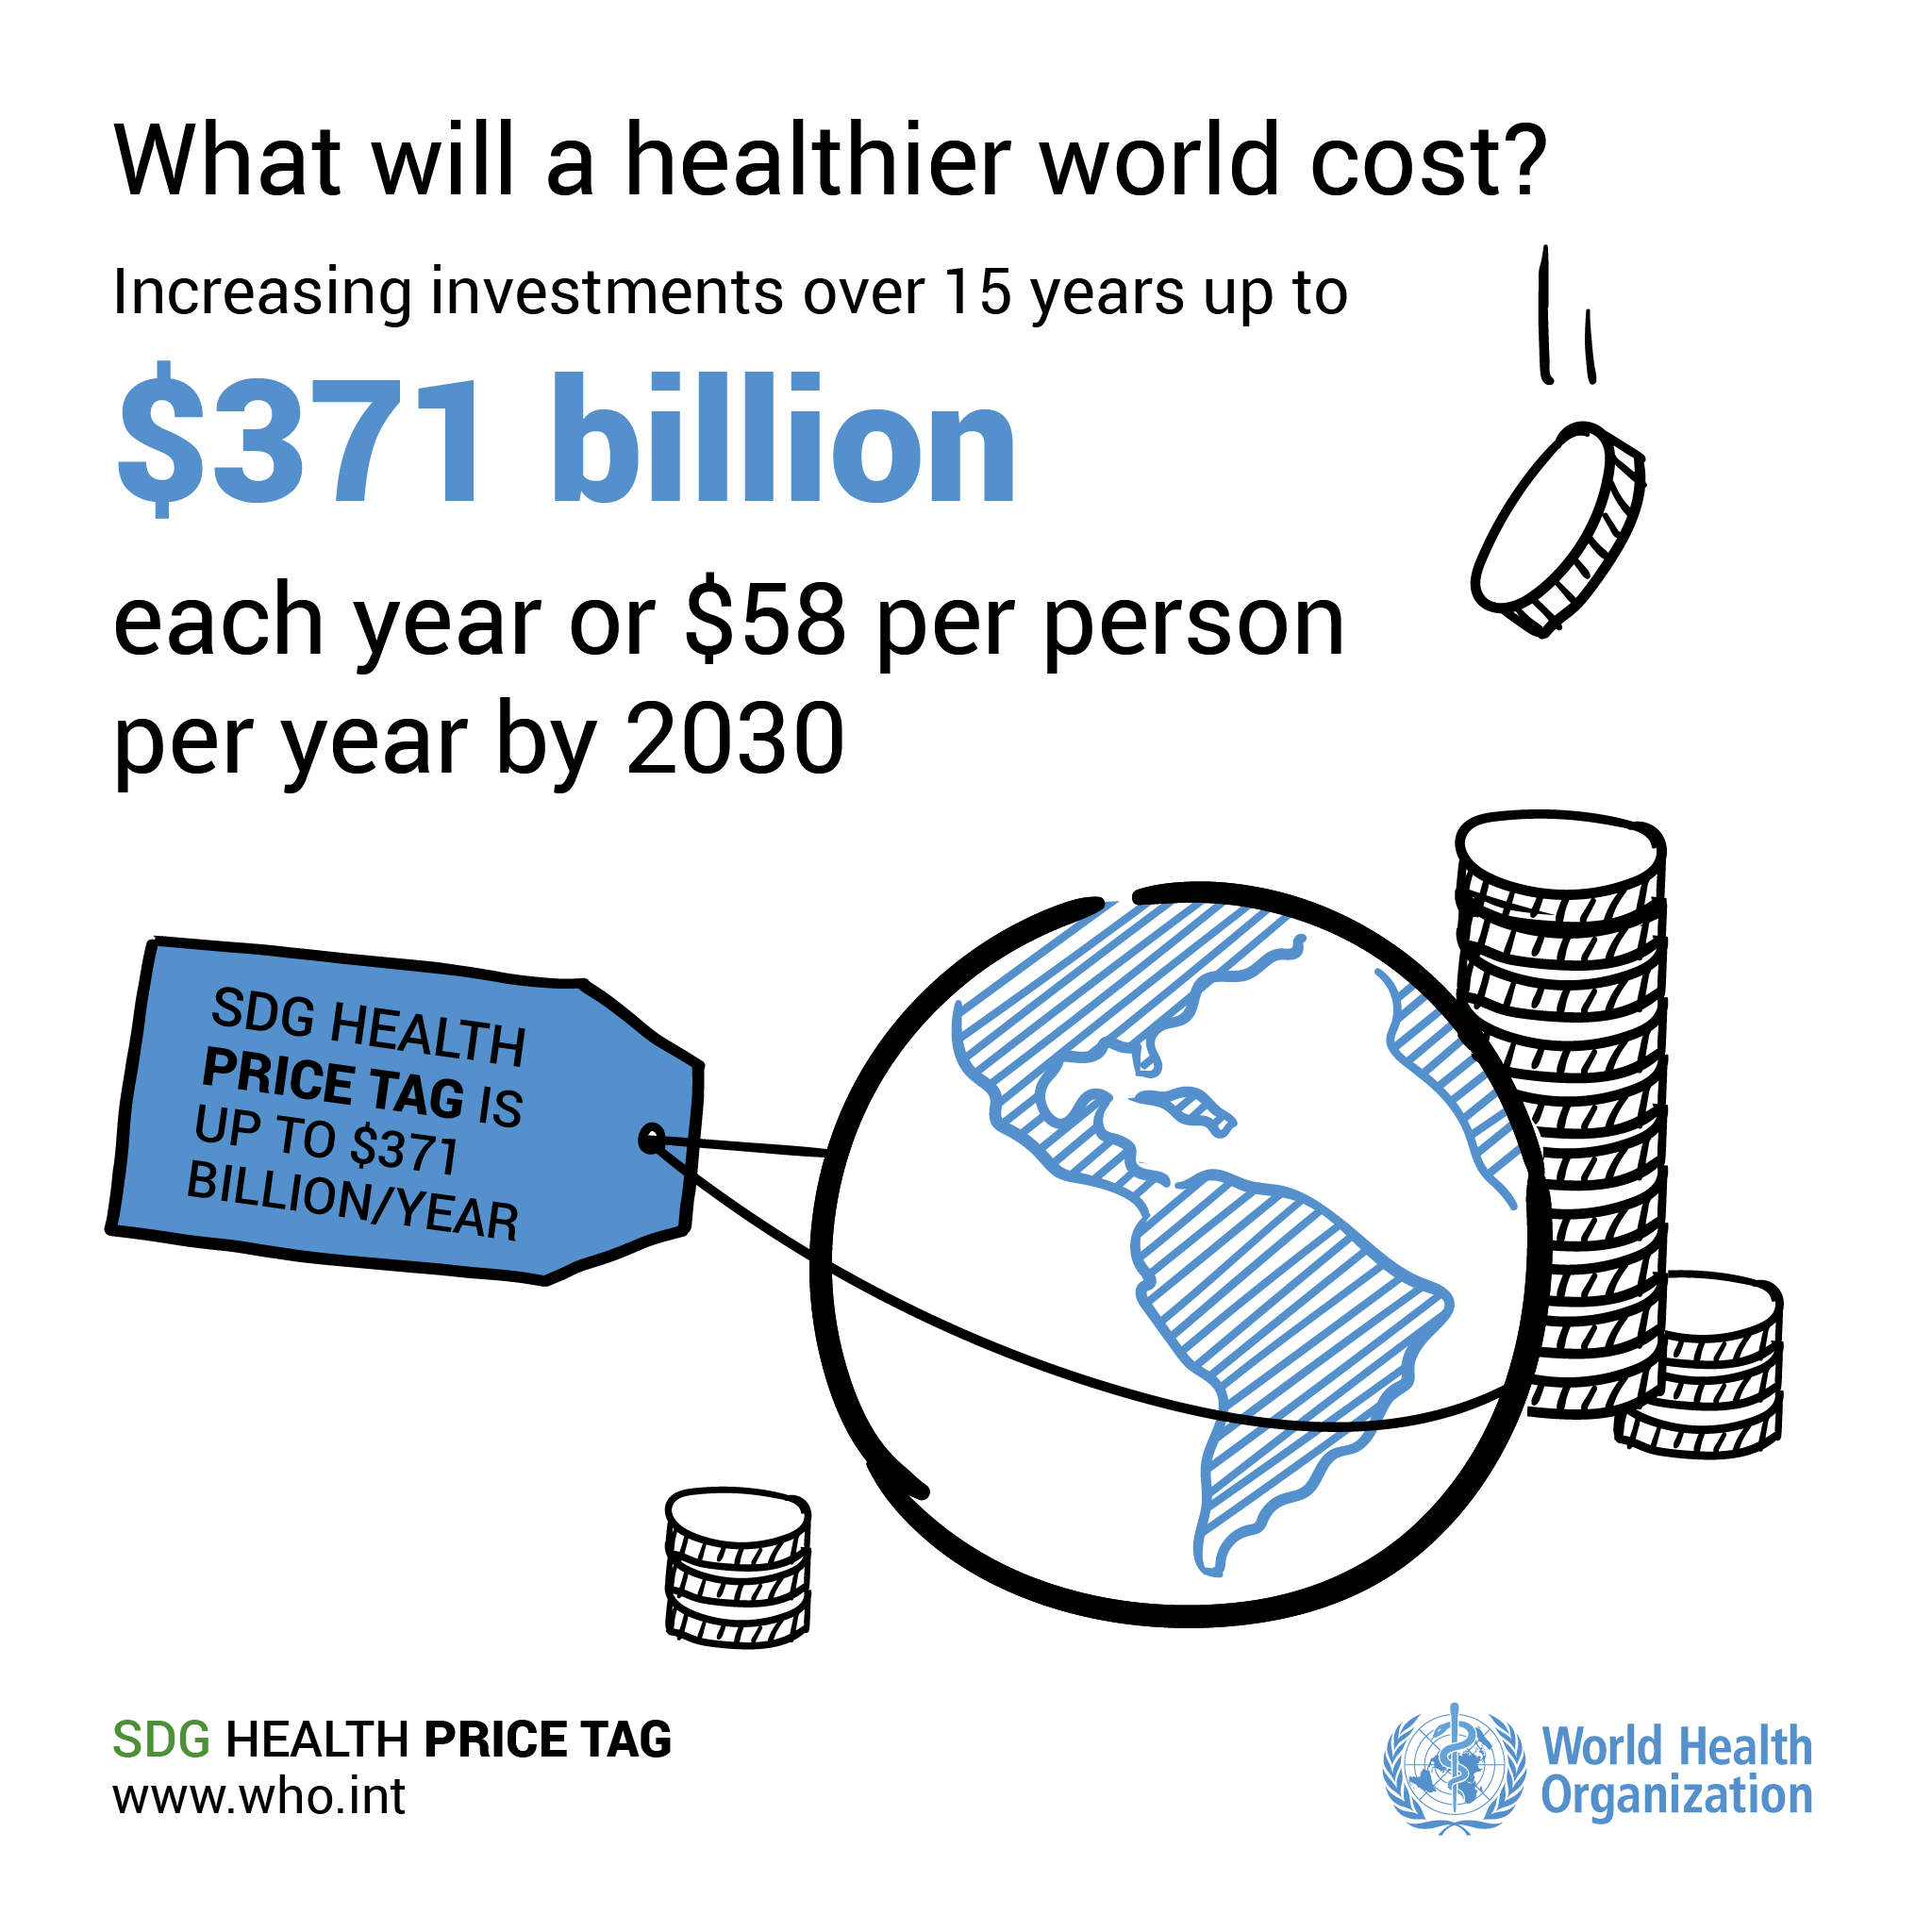 SDG Health Price Tag. We have the numbers. How do we split the bill?